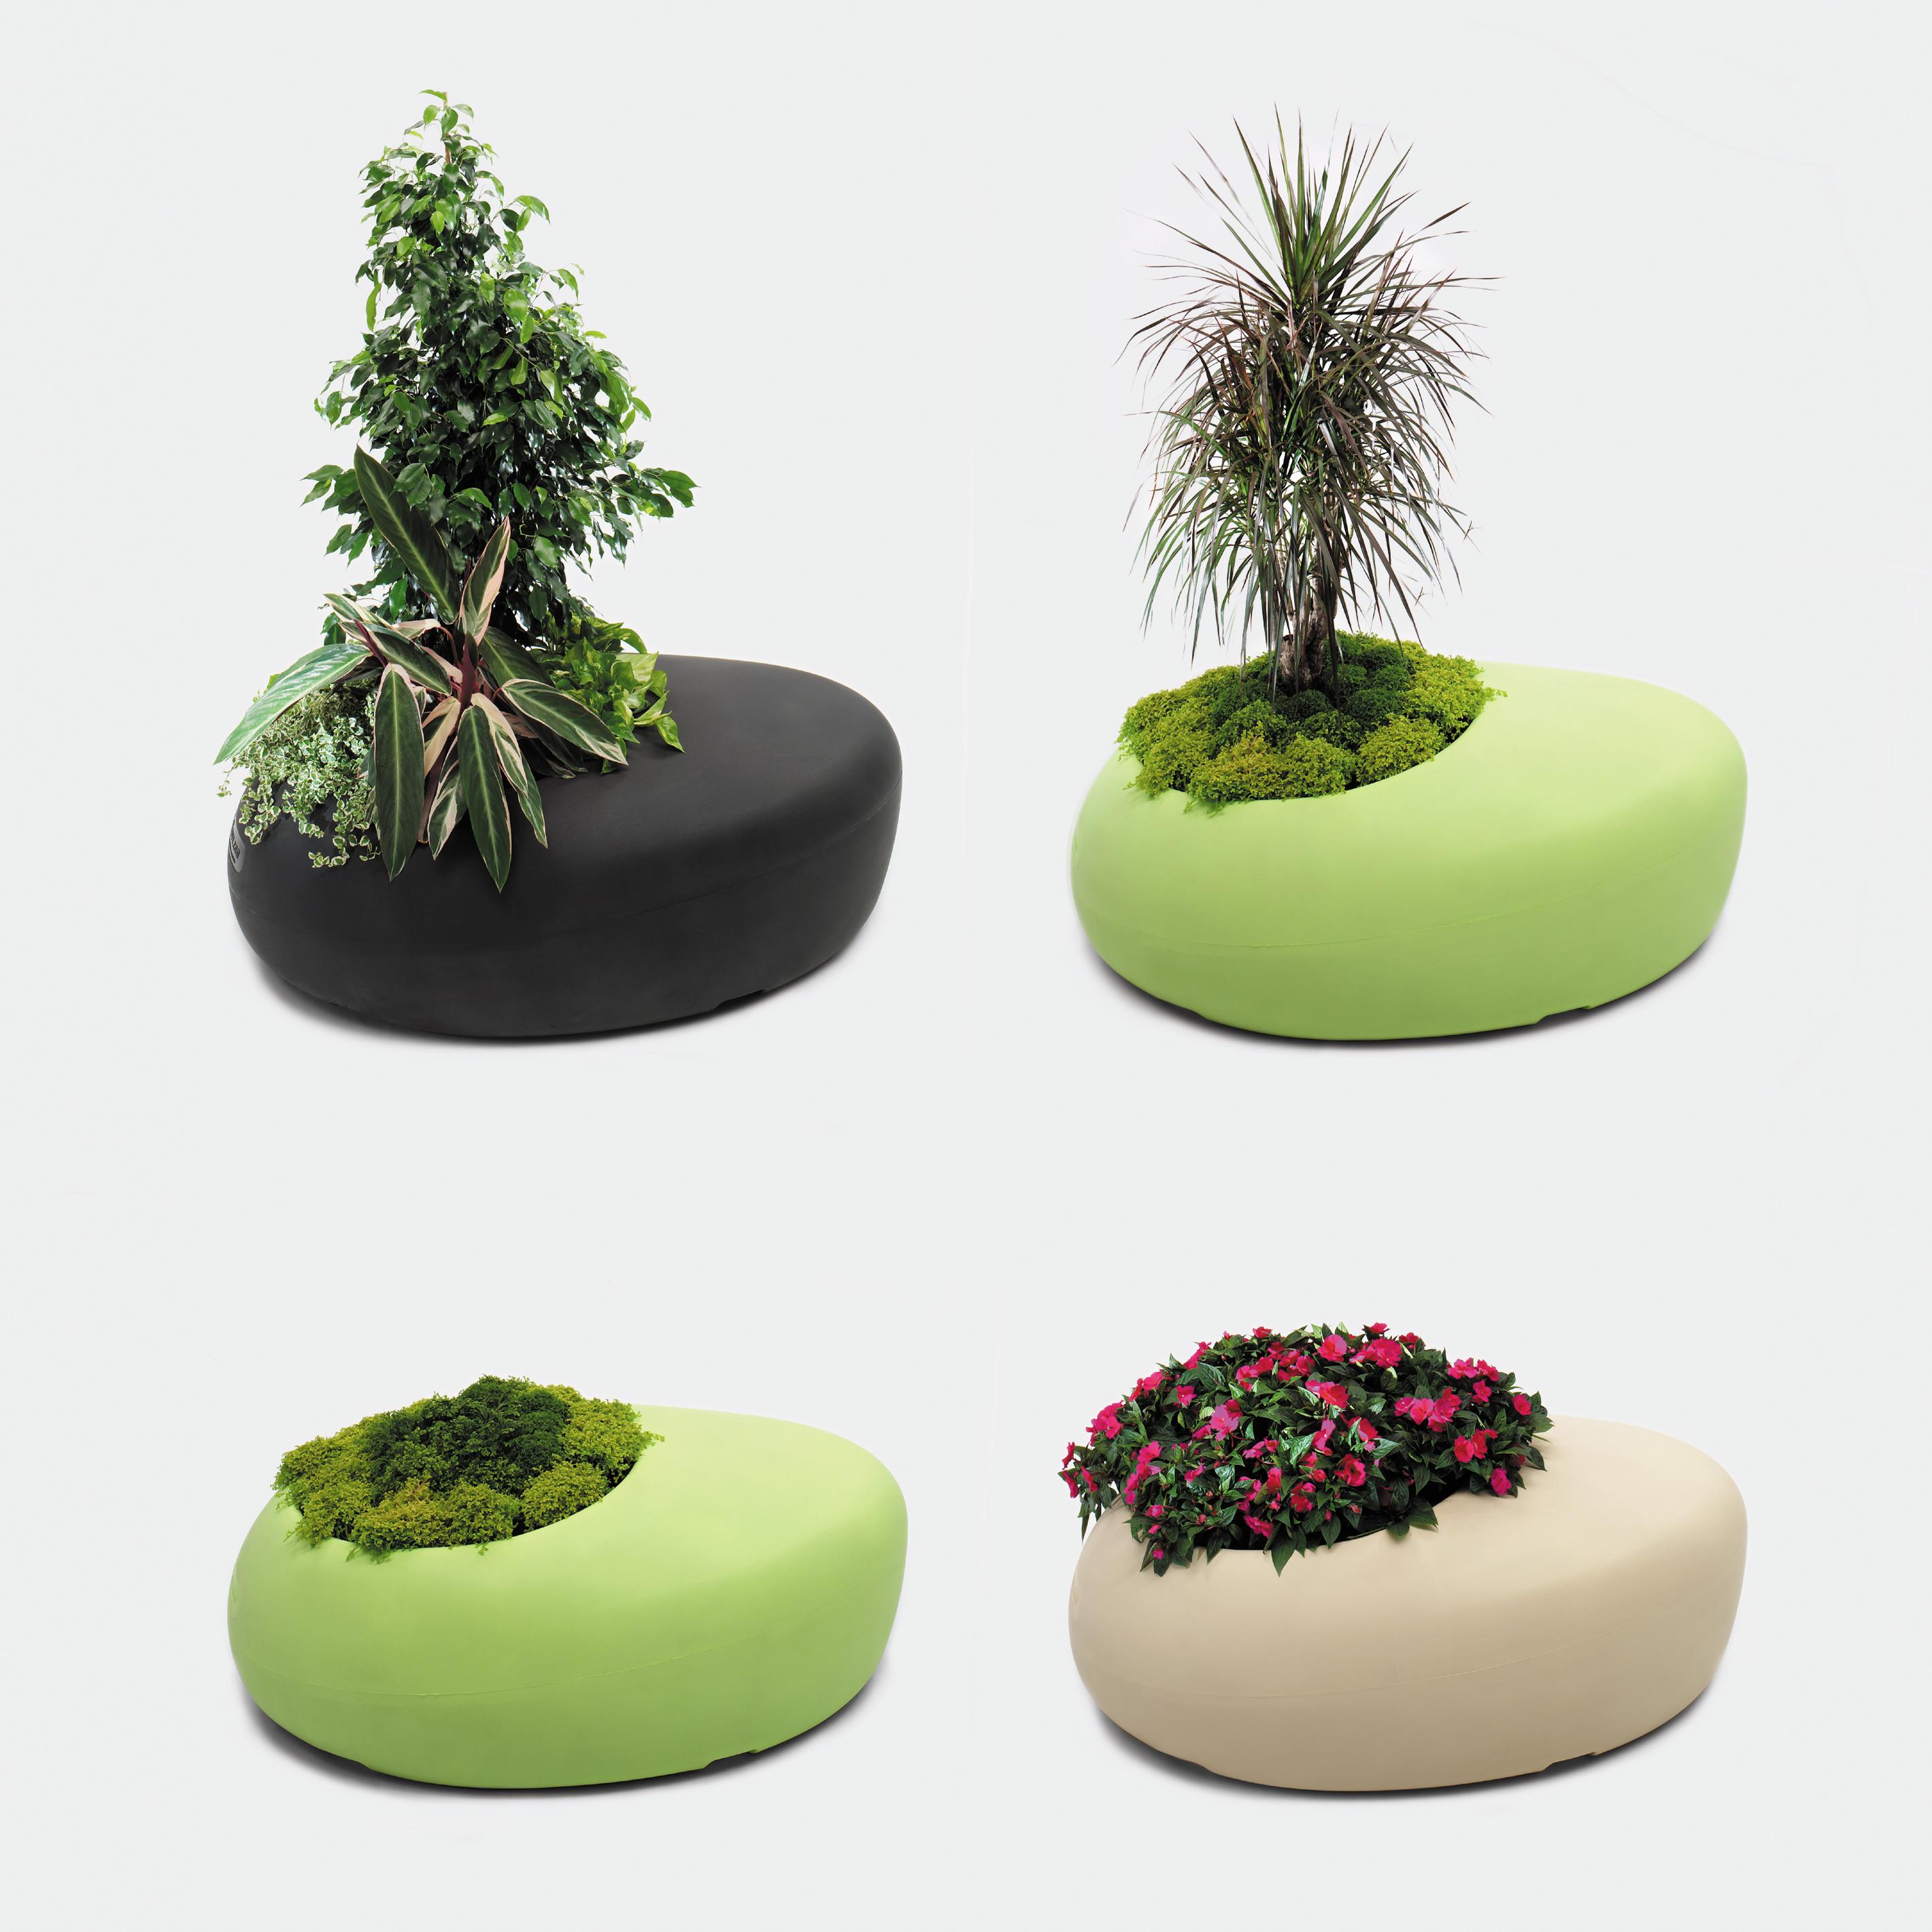 Love Planter is made from rotation-moulded polyethylene, a 100% waterproof material that is dyed during the manufacturing process to give suggest an infinite spectrum of attractive colors (to the client’s own specifications, subject to the number of